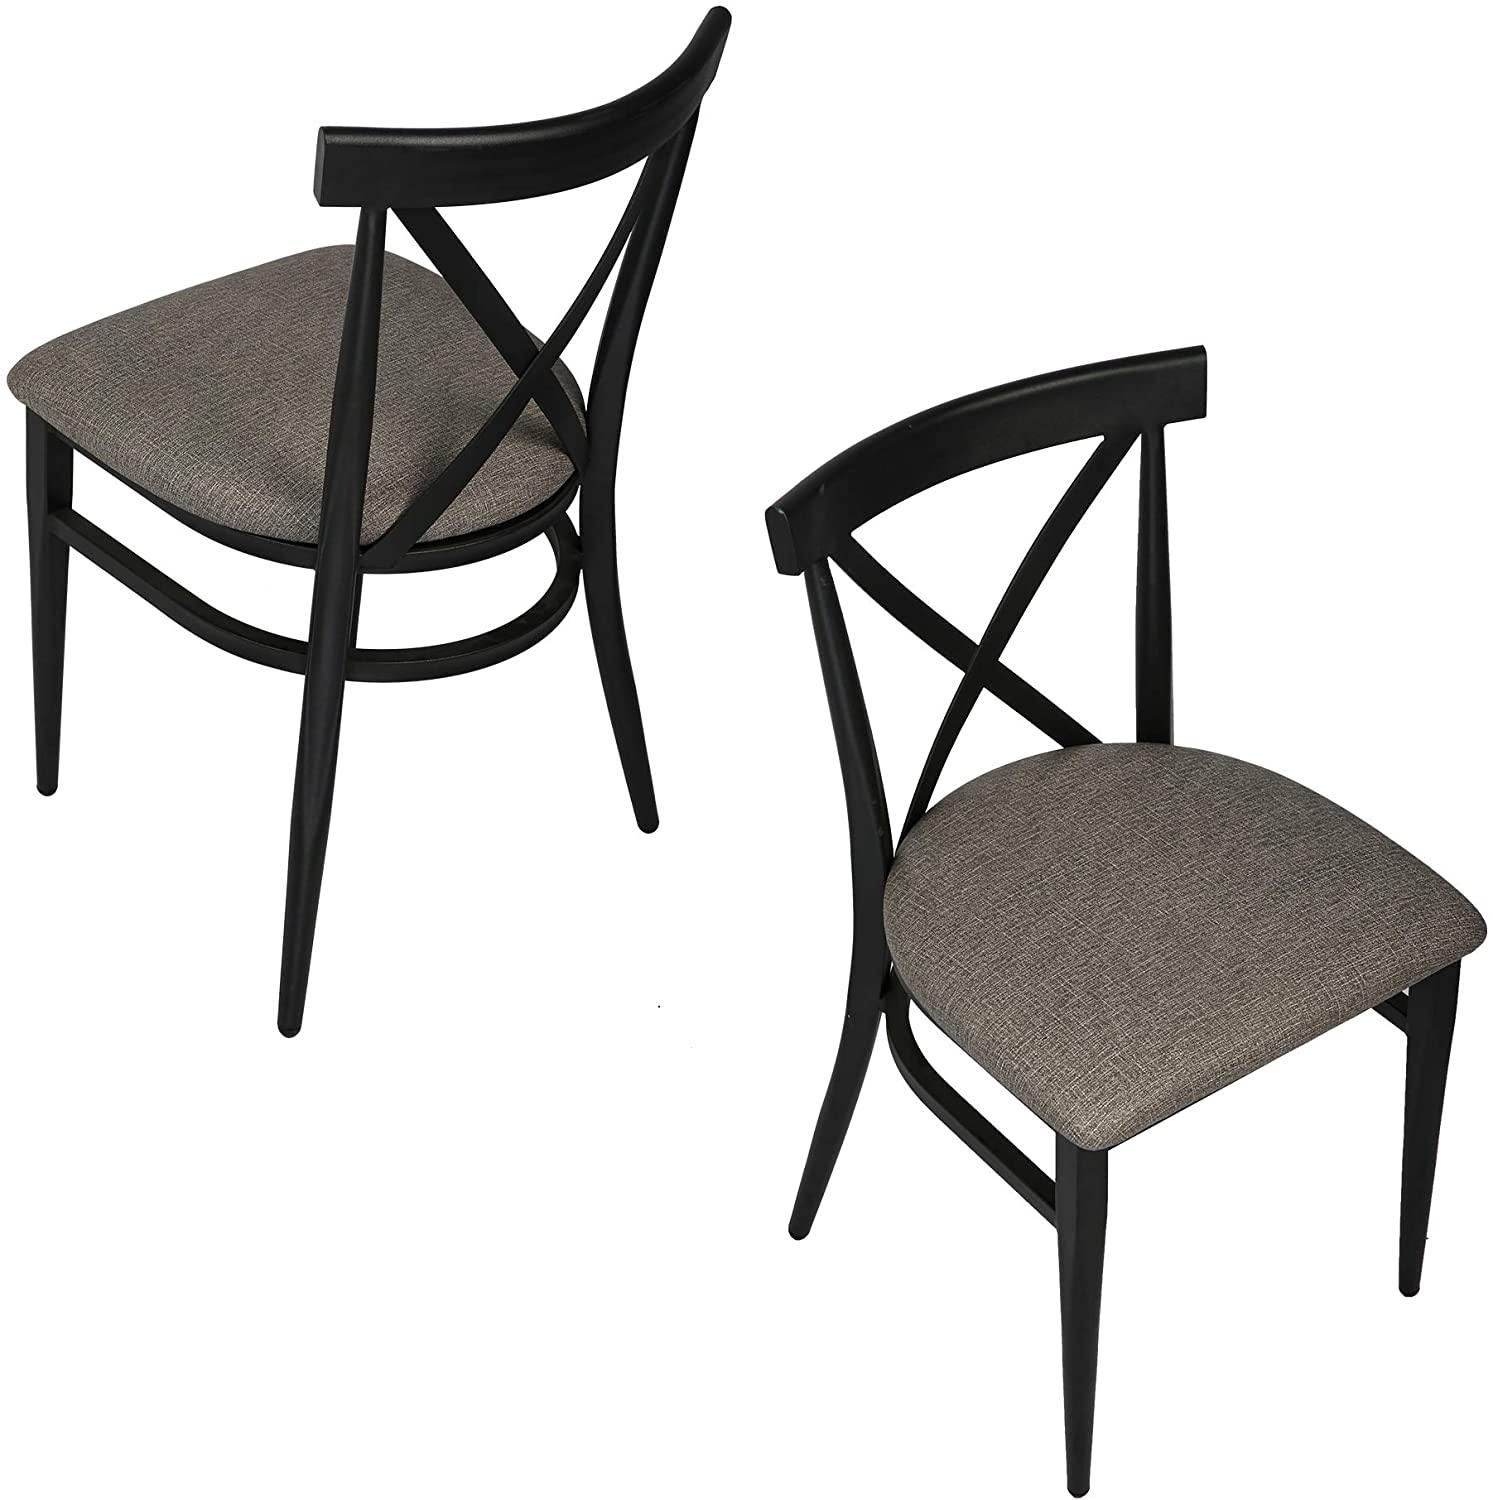 Cross Back Dining Chairs With Metal Frame & PU Leather Seat, Stackable X-Shaped Back Inhustrial Metal Chair, Set of 2(Gray & Black) - Bosonshop